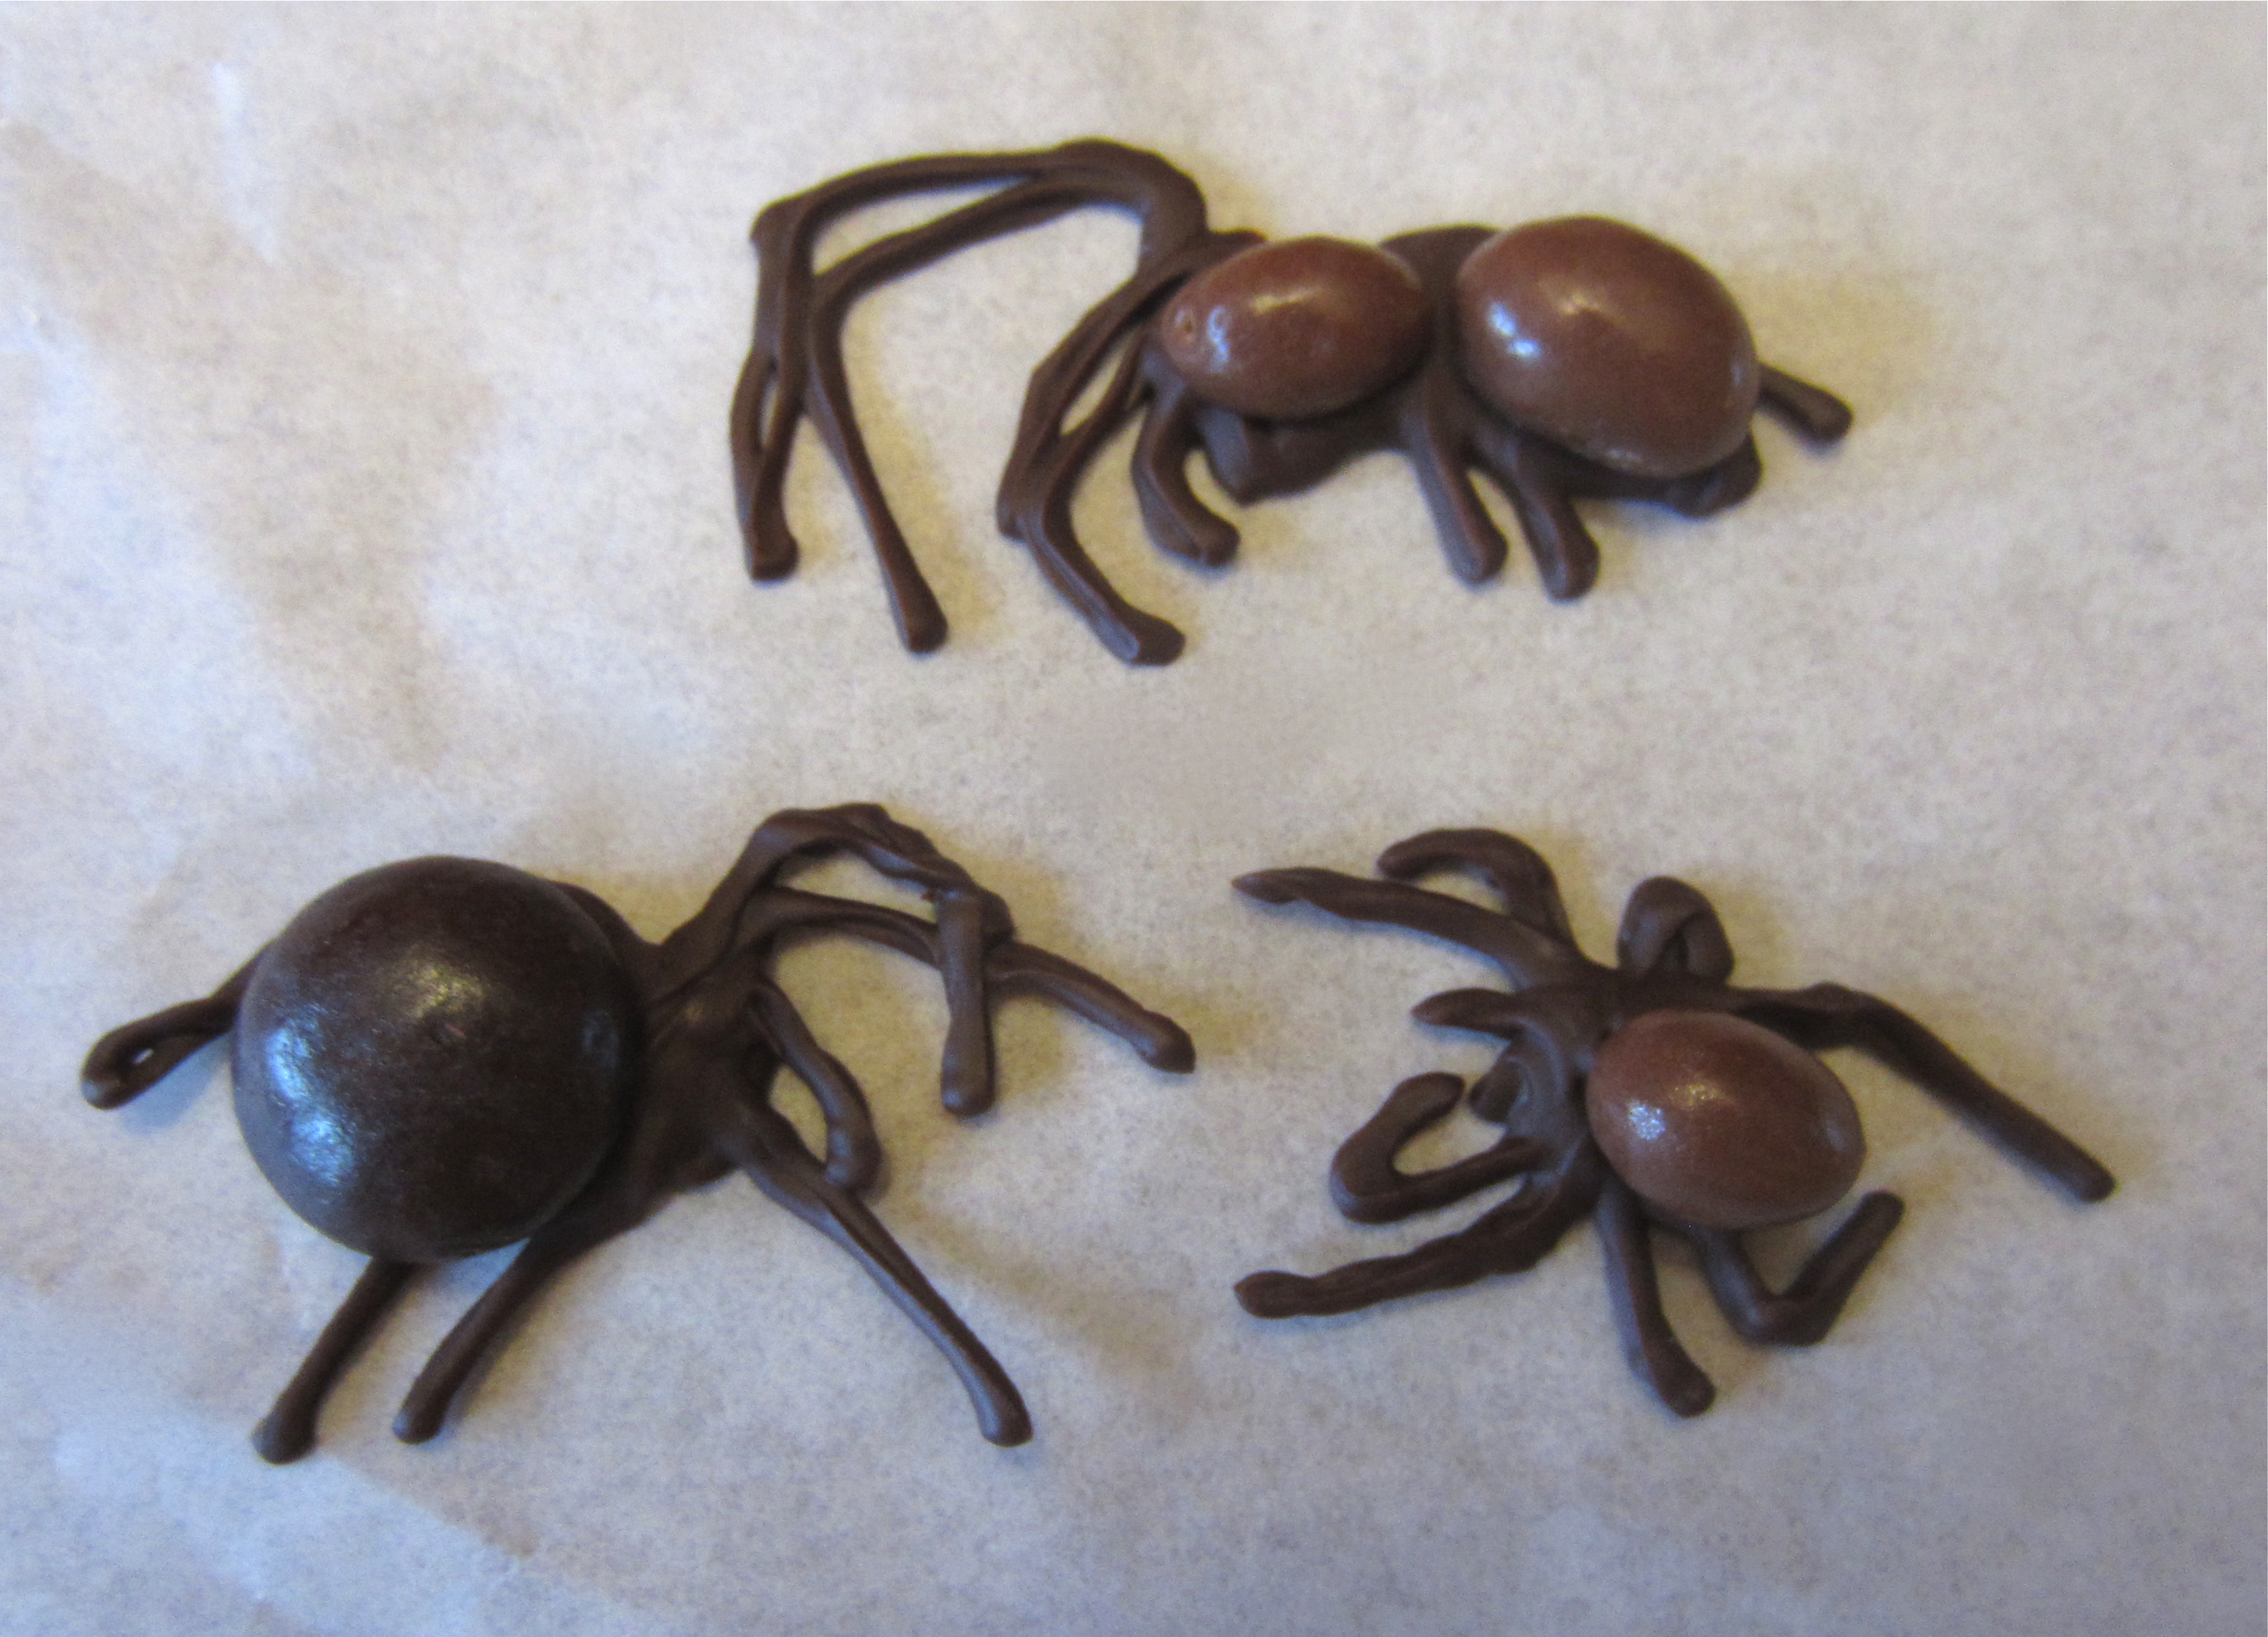 22 Creepy Things Made Out Of Chocolate